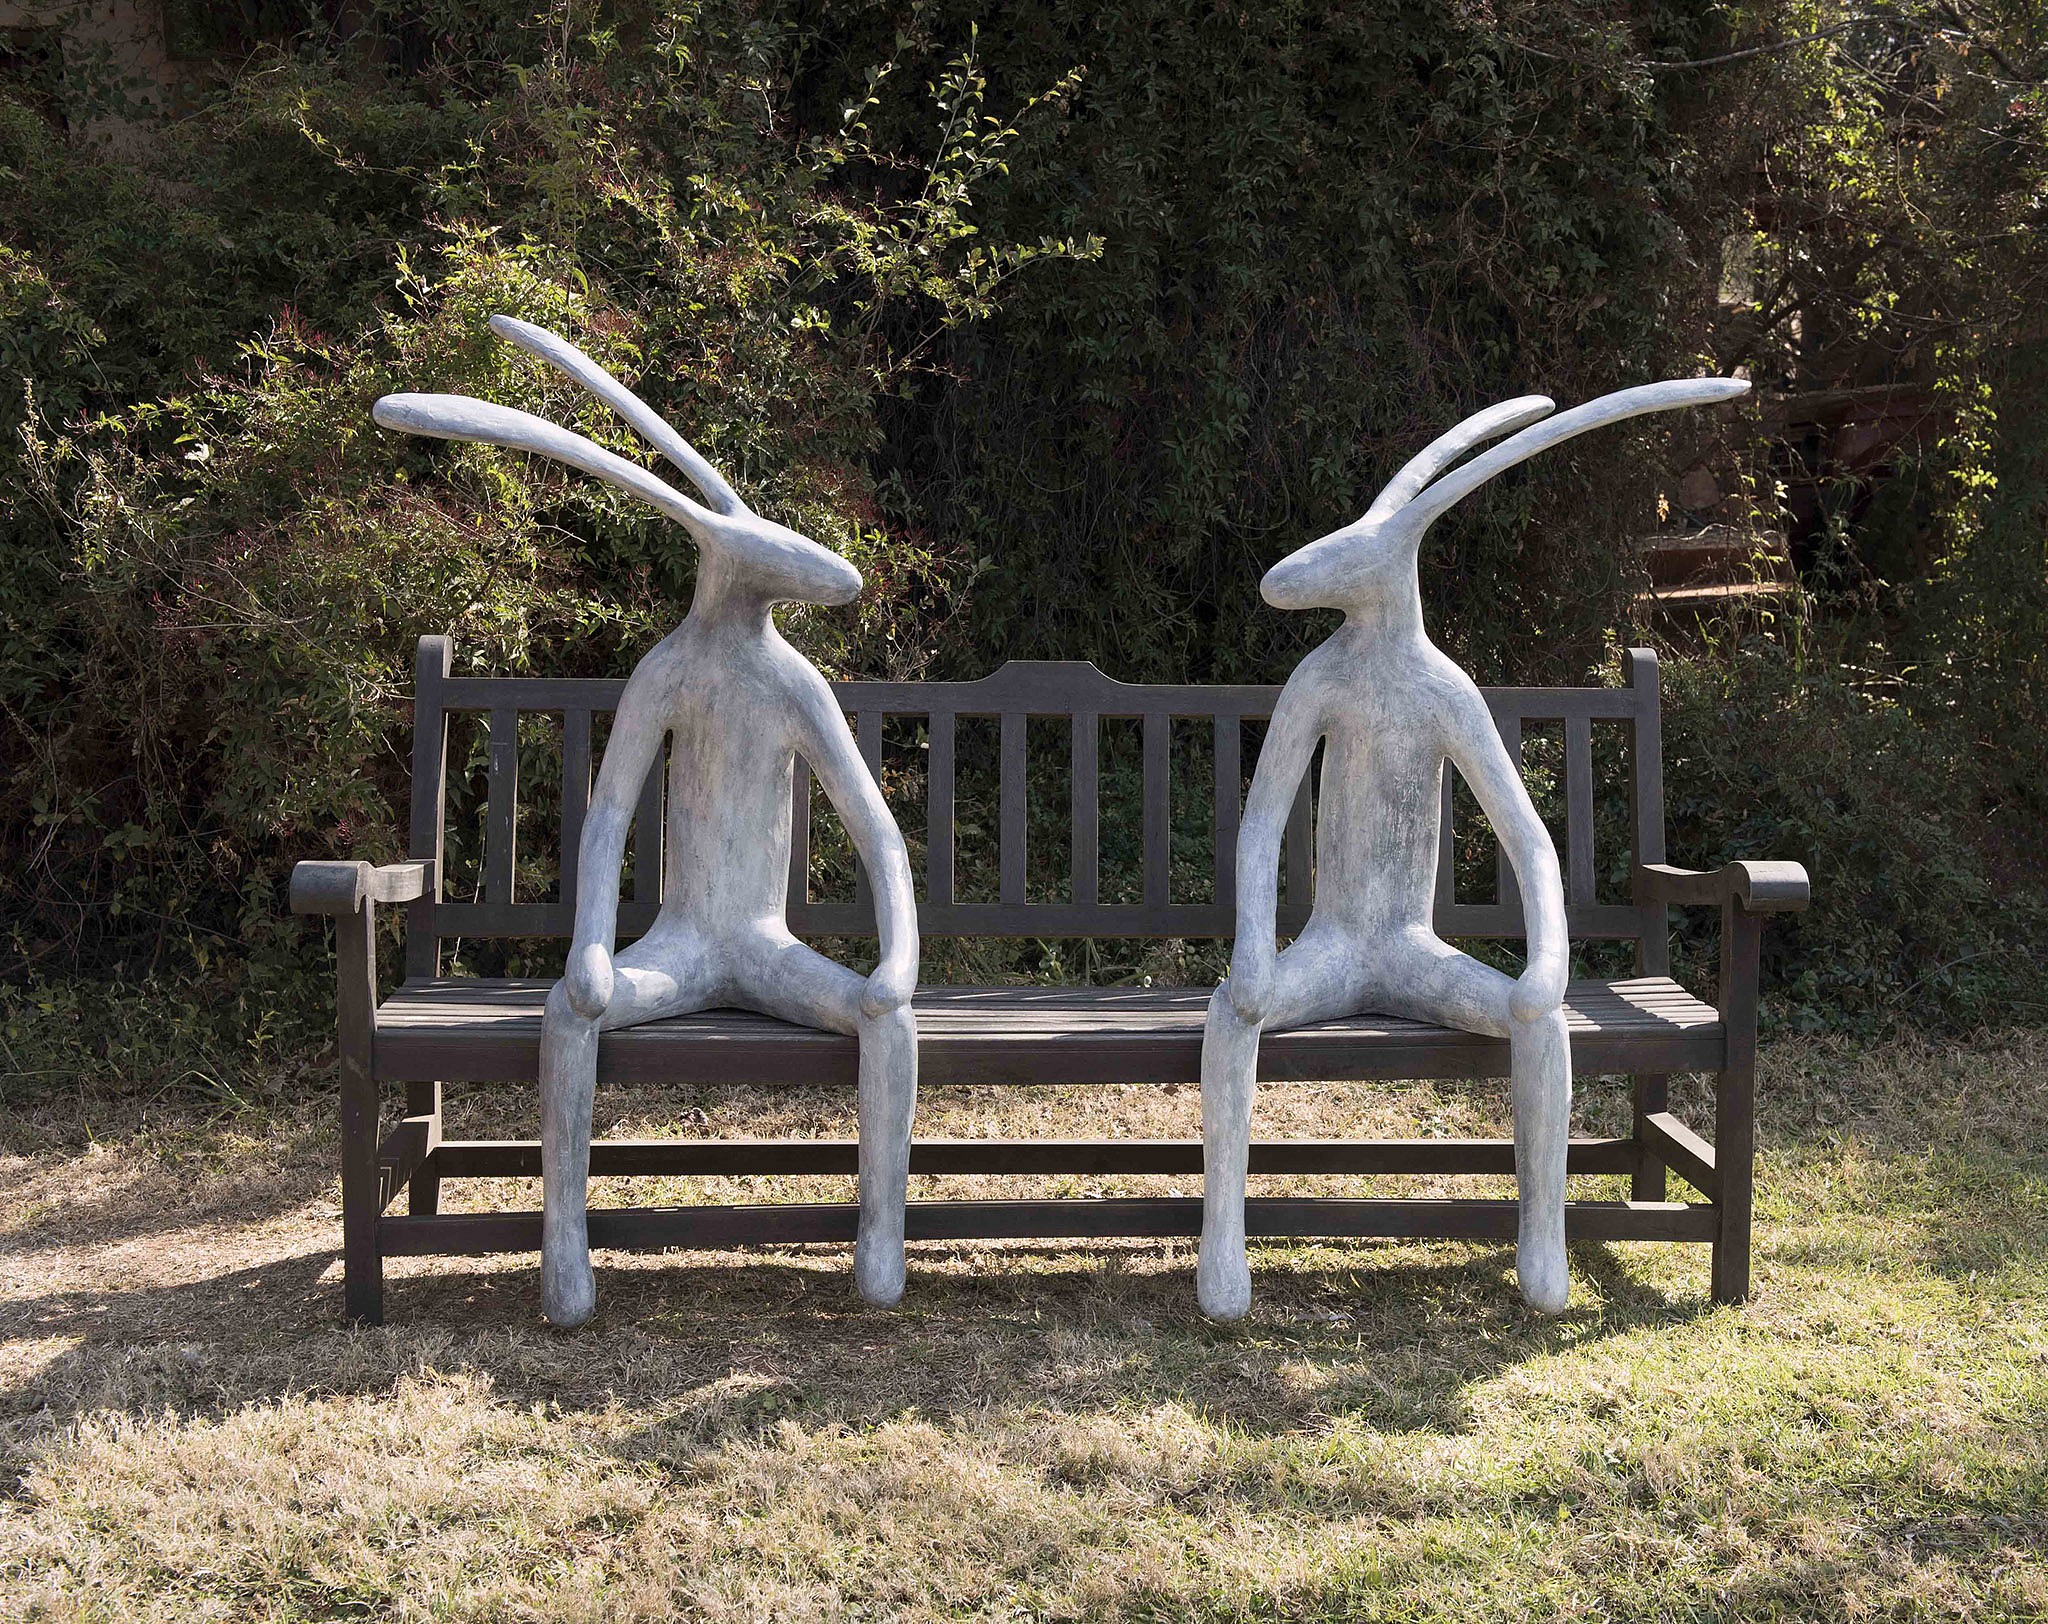 DU TOIT HARE PAIR ON A BENCH web